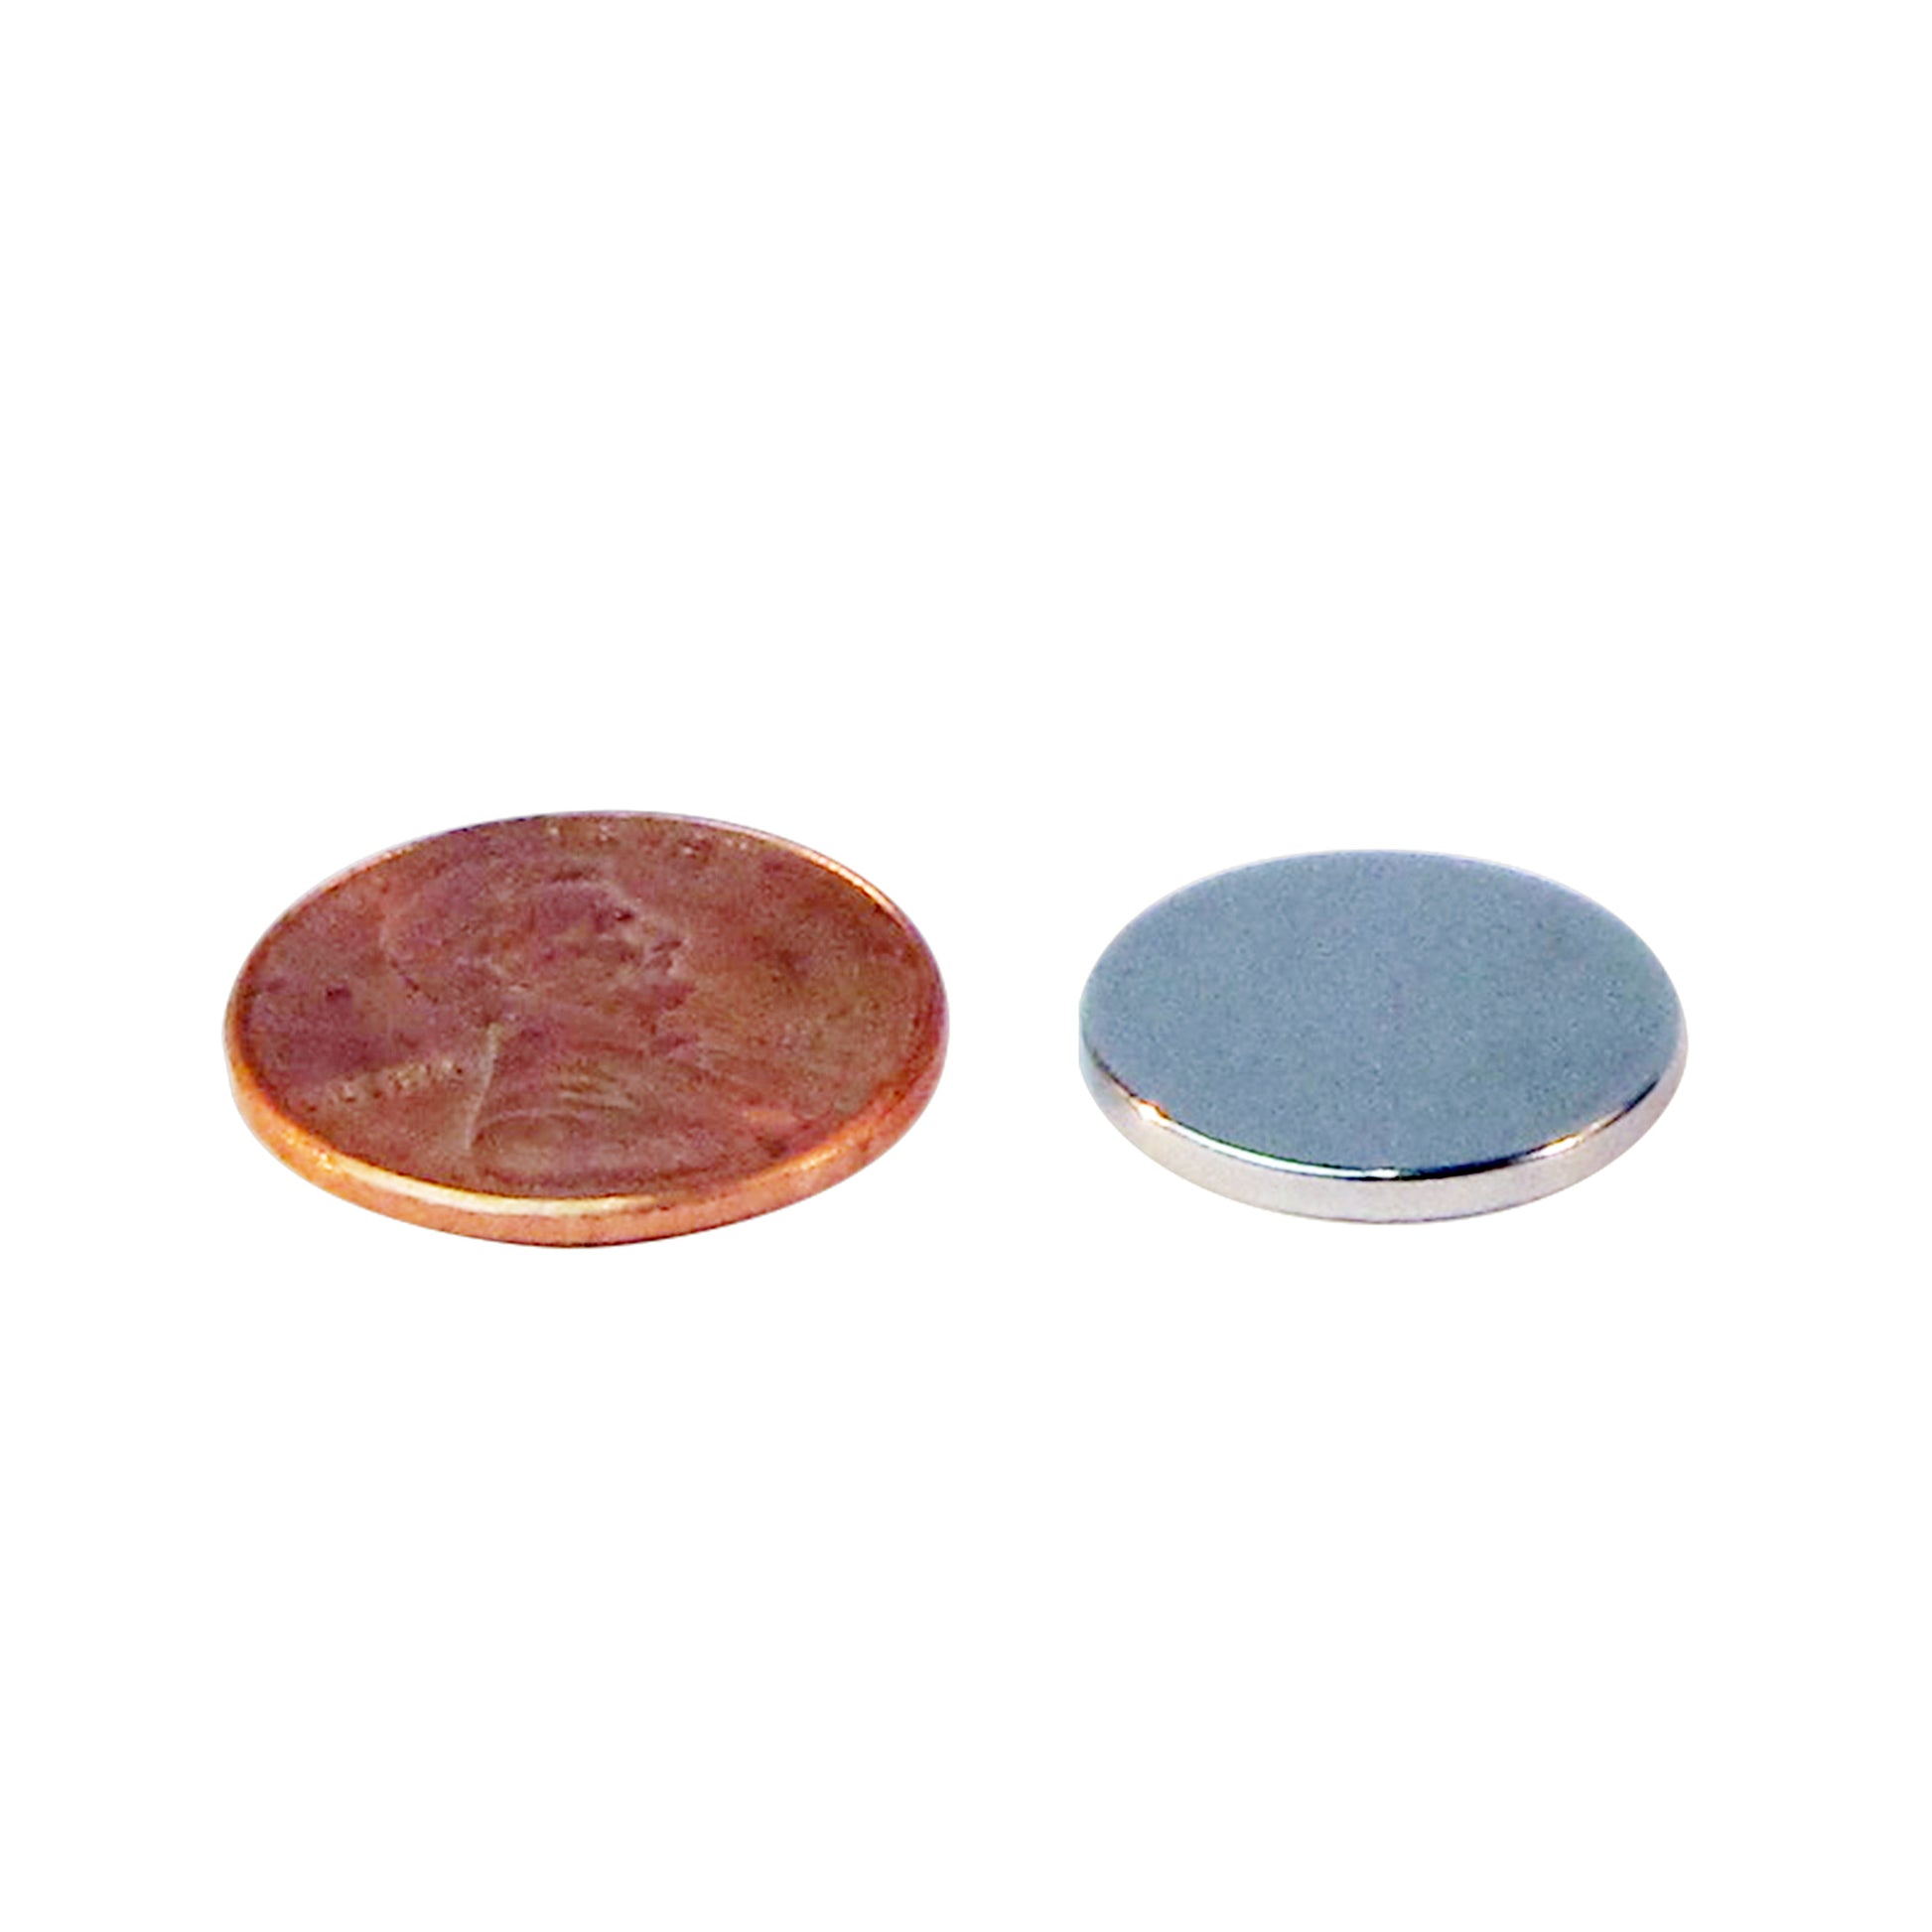 Load image into Gallery viewer, ND45-6206N Neodymium Disc Magnet - Compared to Penny for Size Reference